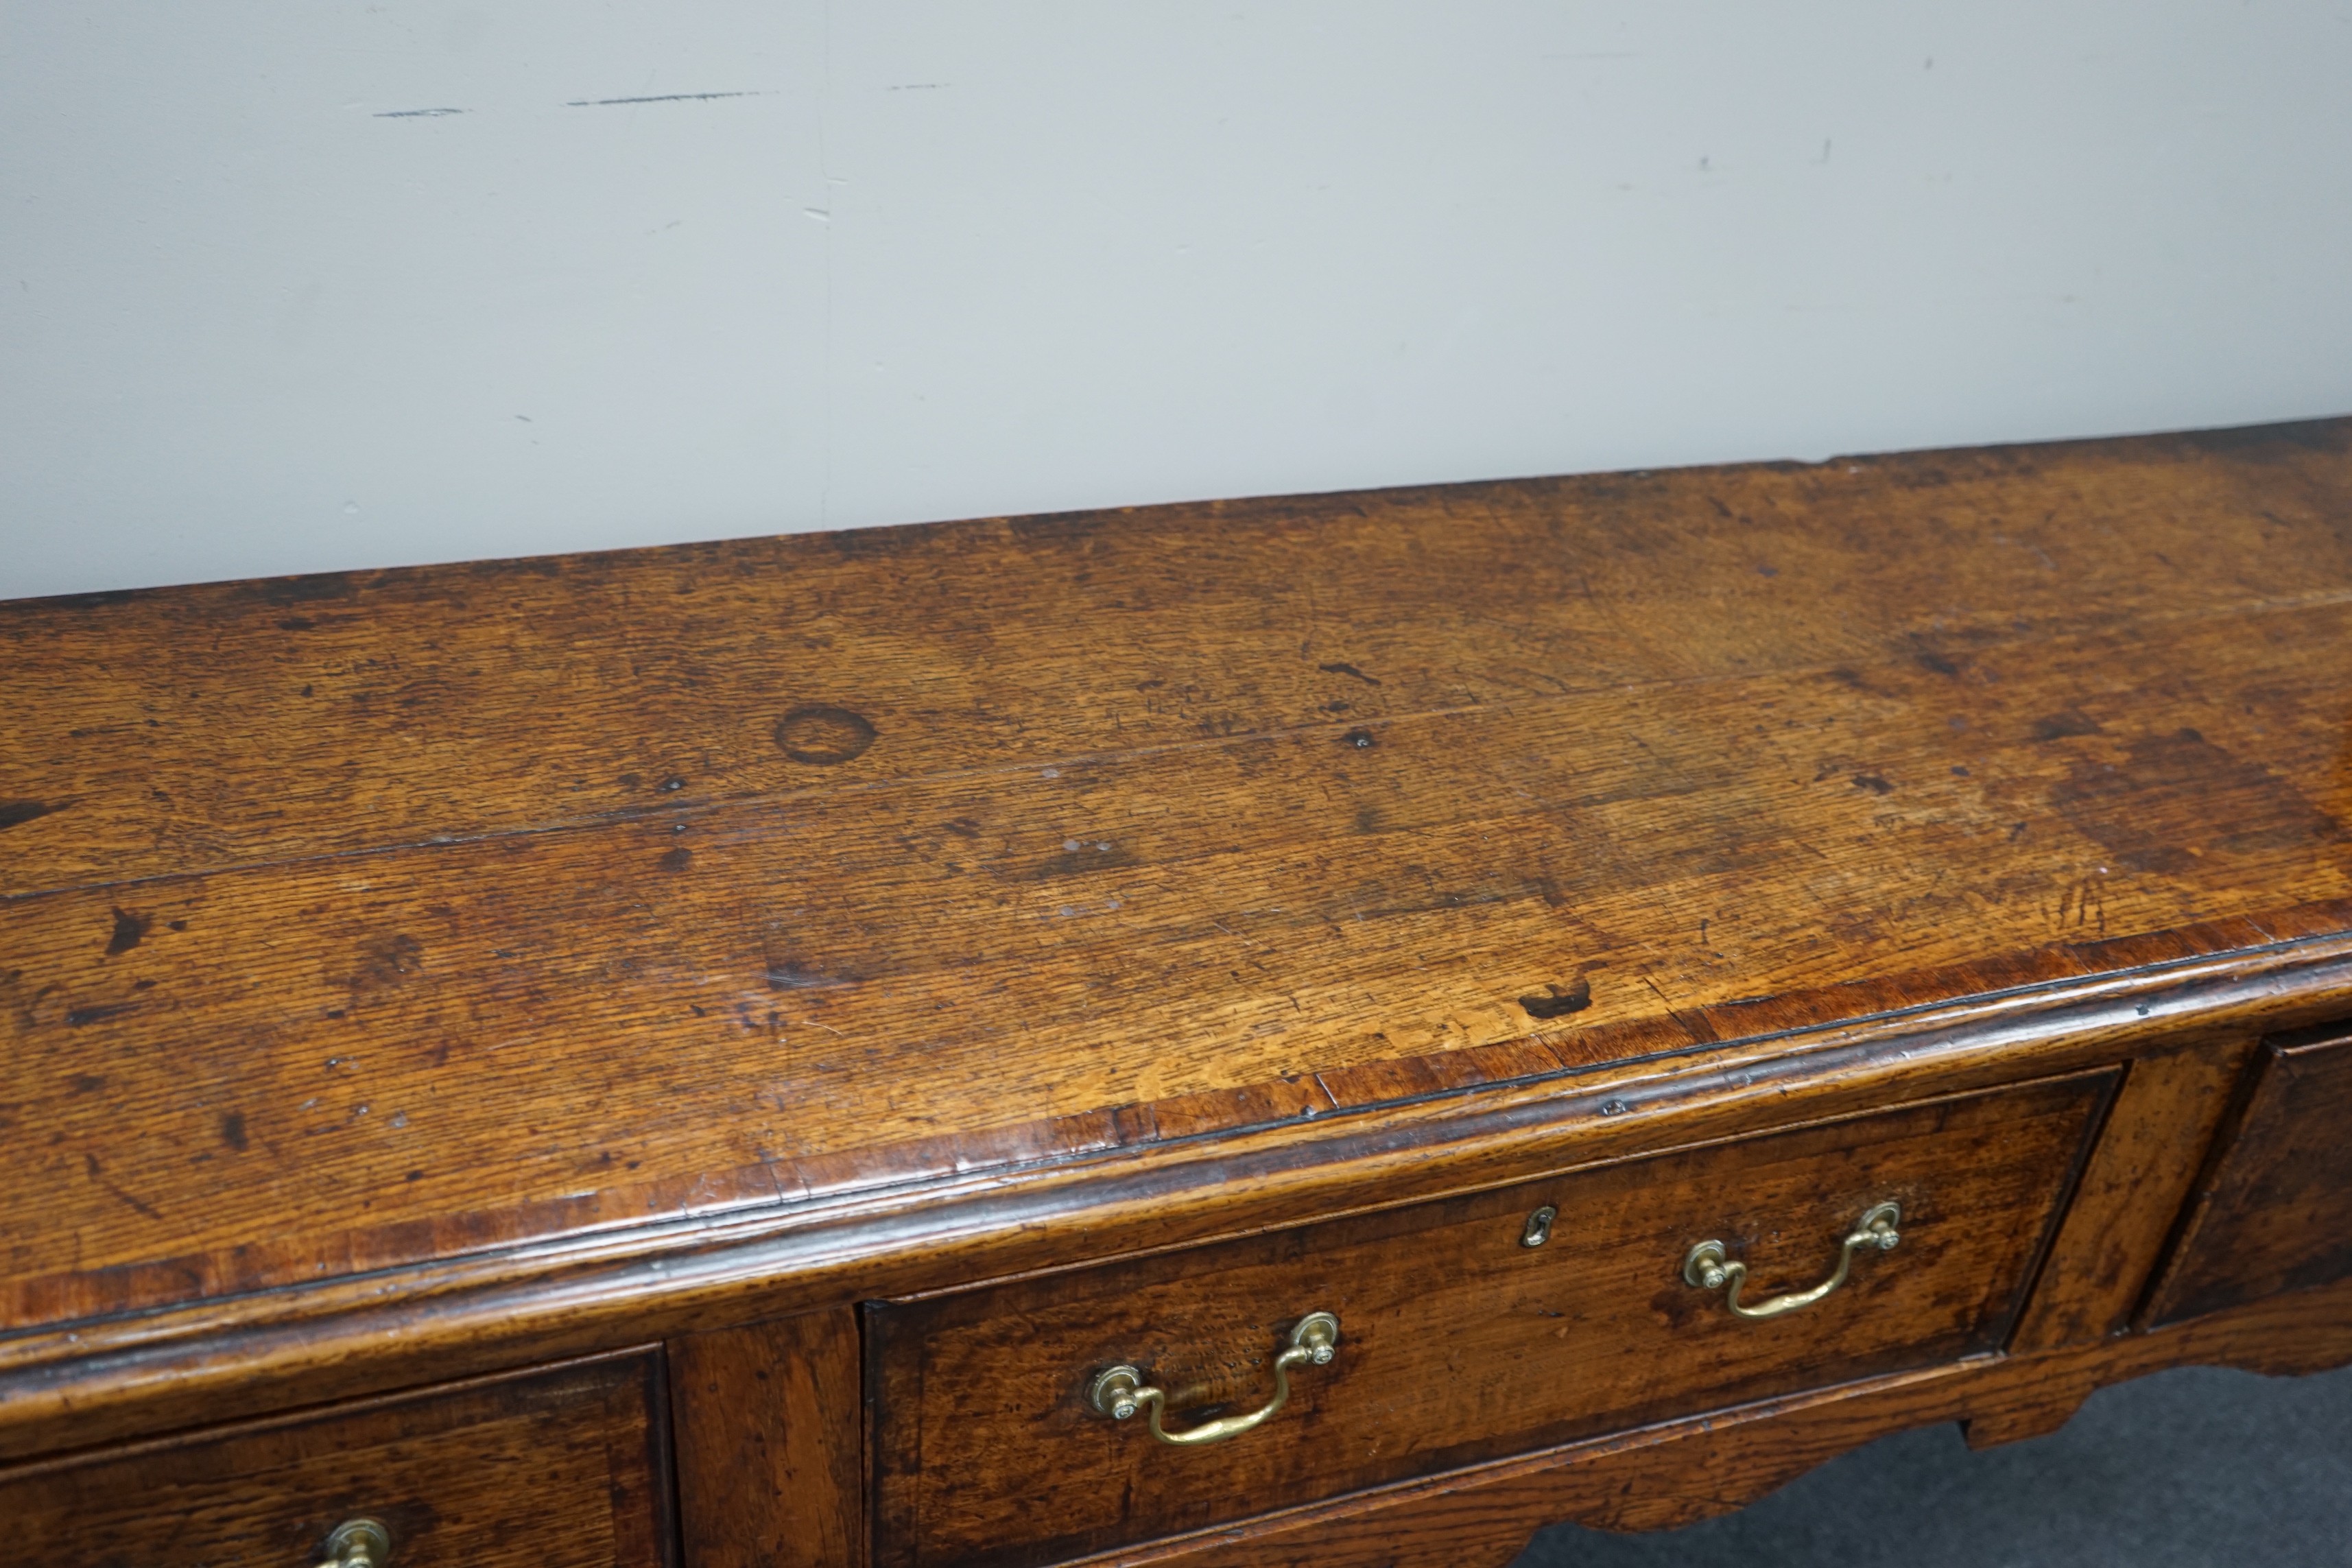 A George III provincial oak and mahogany banded low dresser with three drawers on square tapering legs, width 201cm, depth 46cm, height 83cm